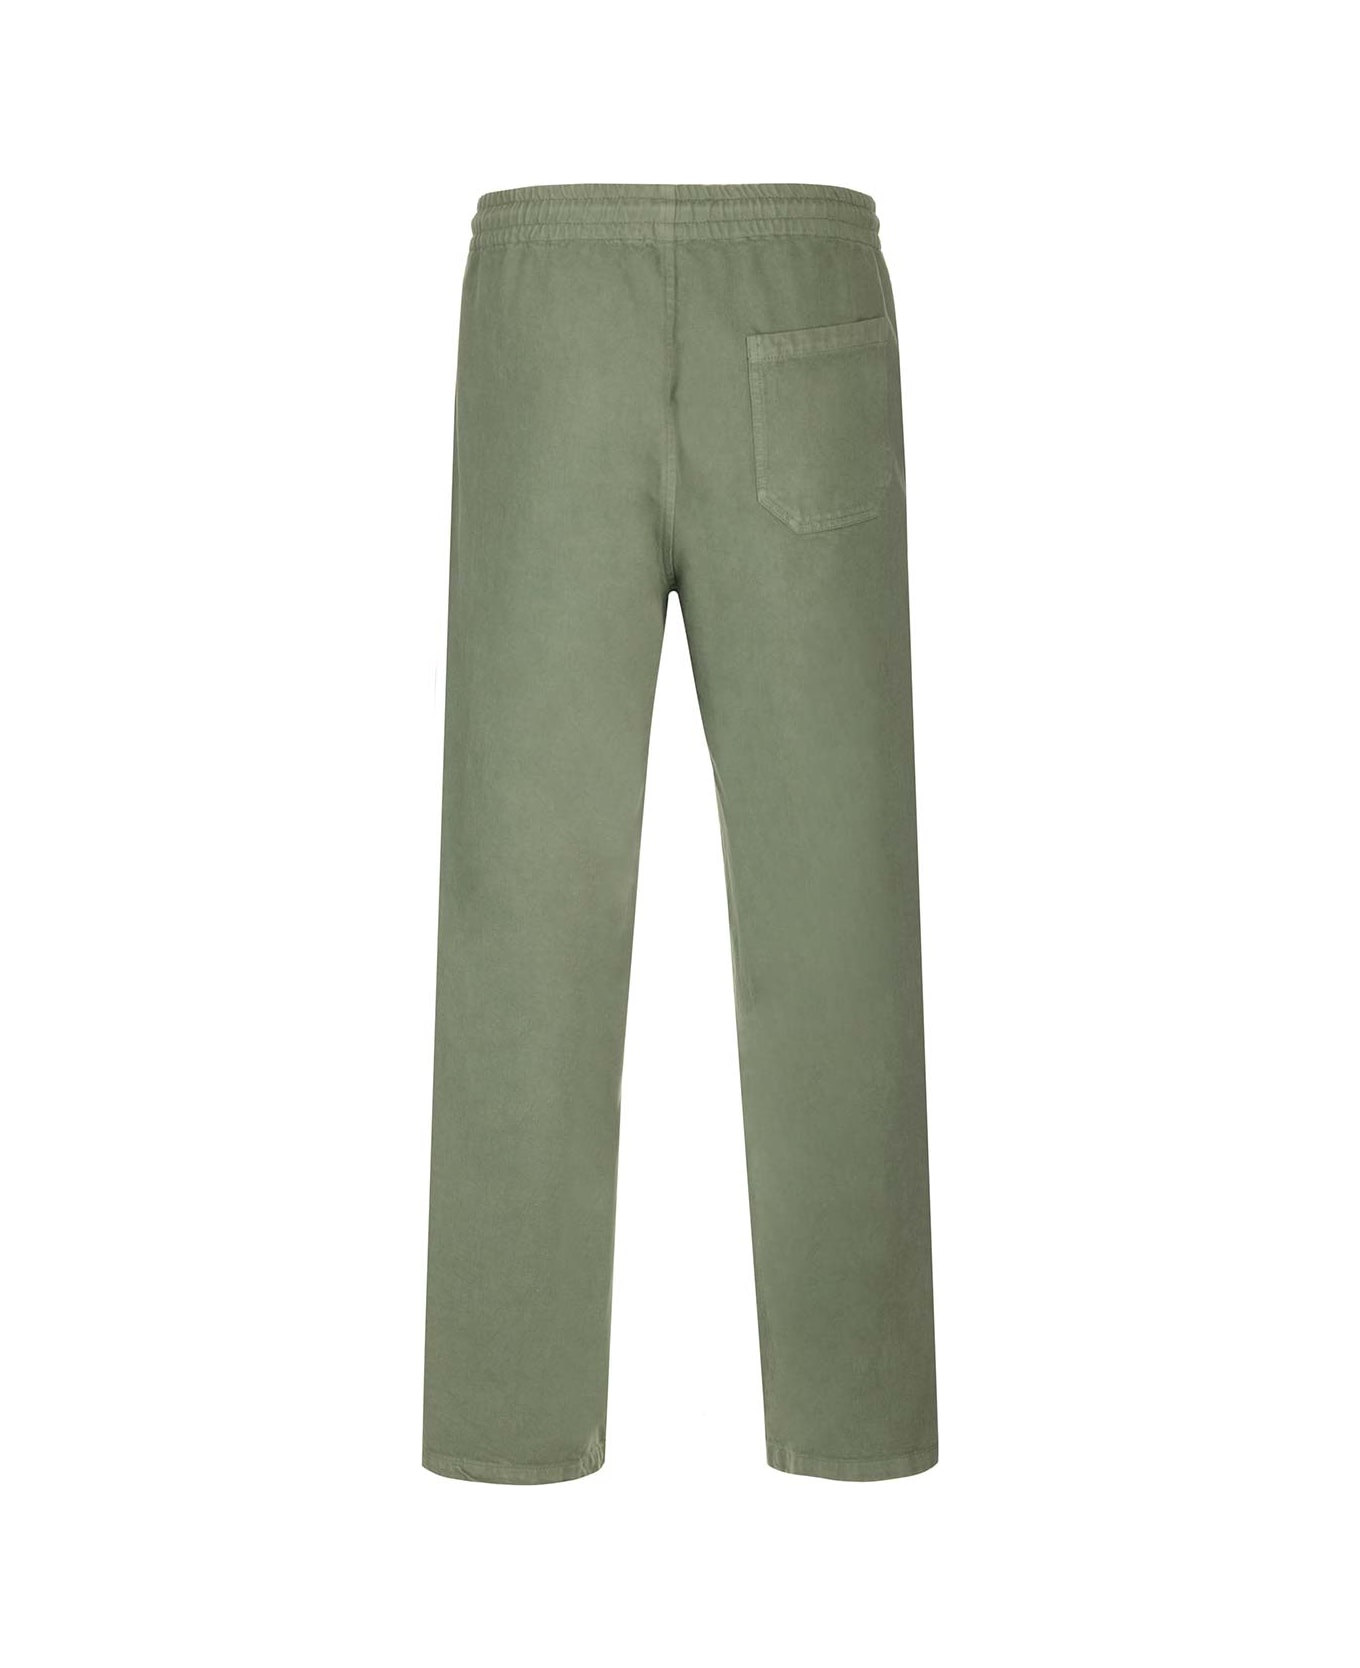 A.P.C. Vincent Trousers - Green ボトムス